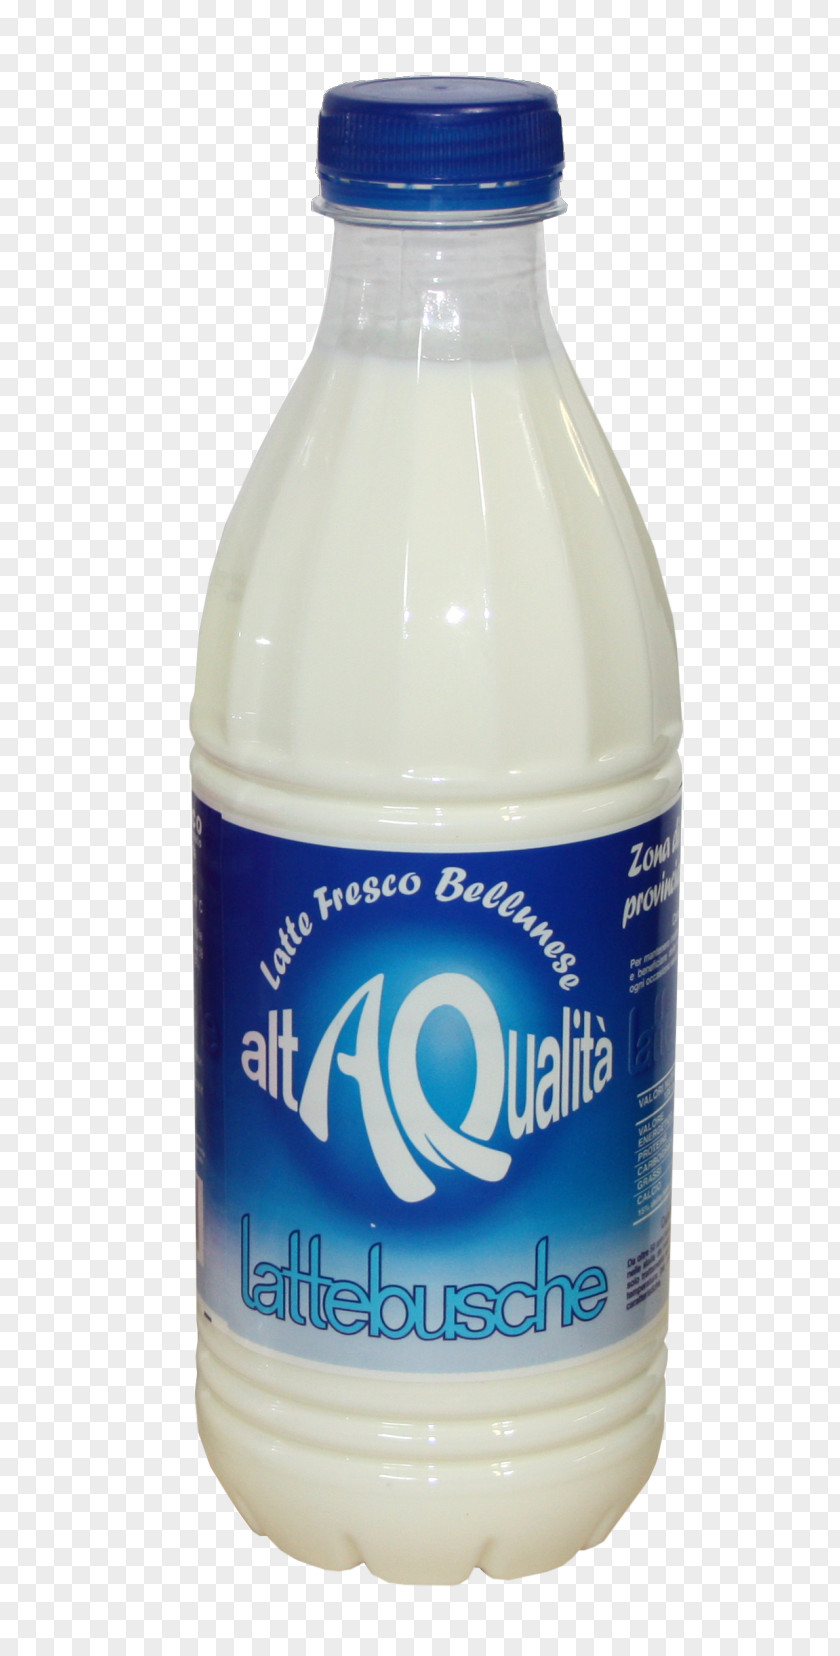 Milk Raw Lattebusche Dairy Products Plastic Bottle PNG